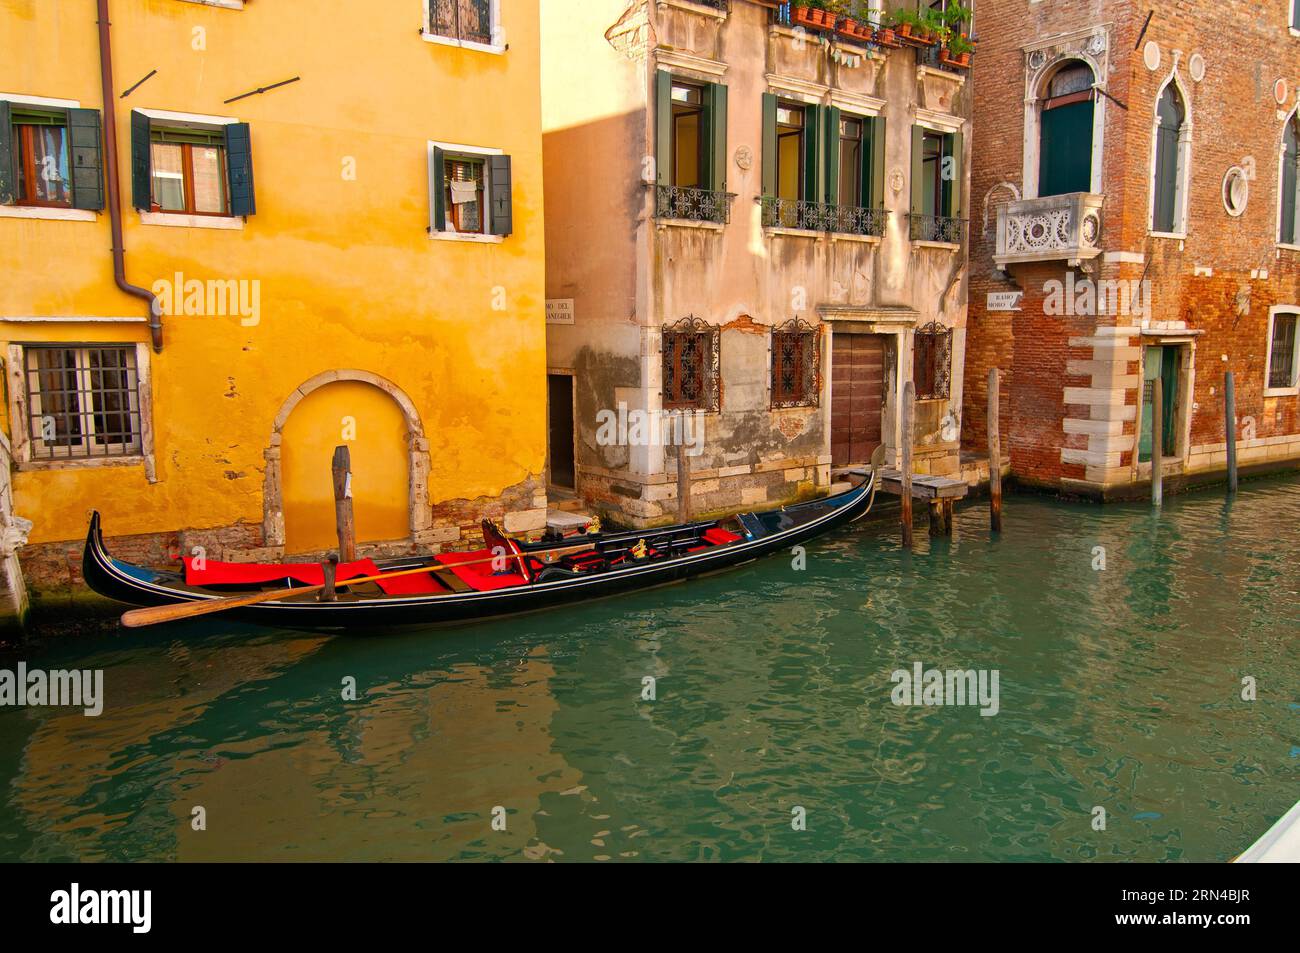 Unusual pittoresque view of Venice Italy most touristic place in the world Stock Photo